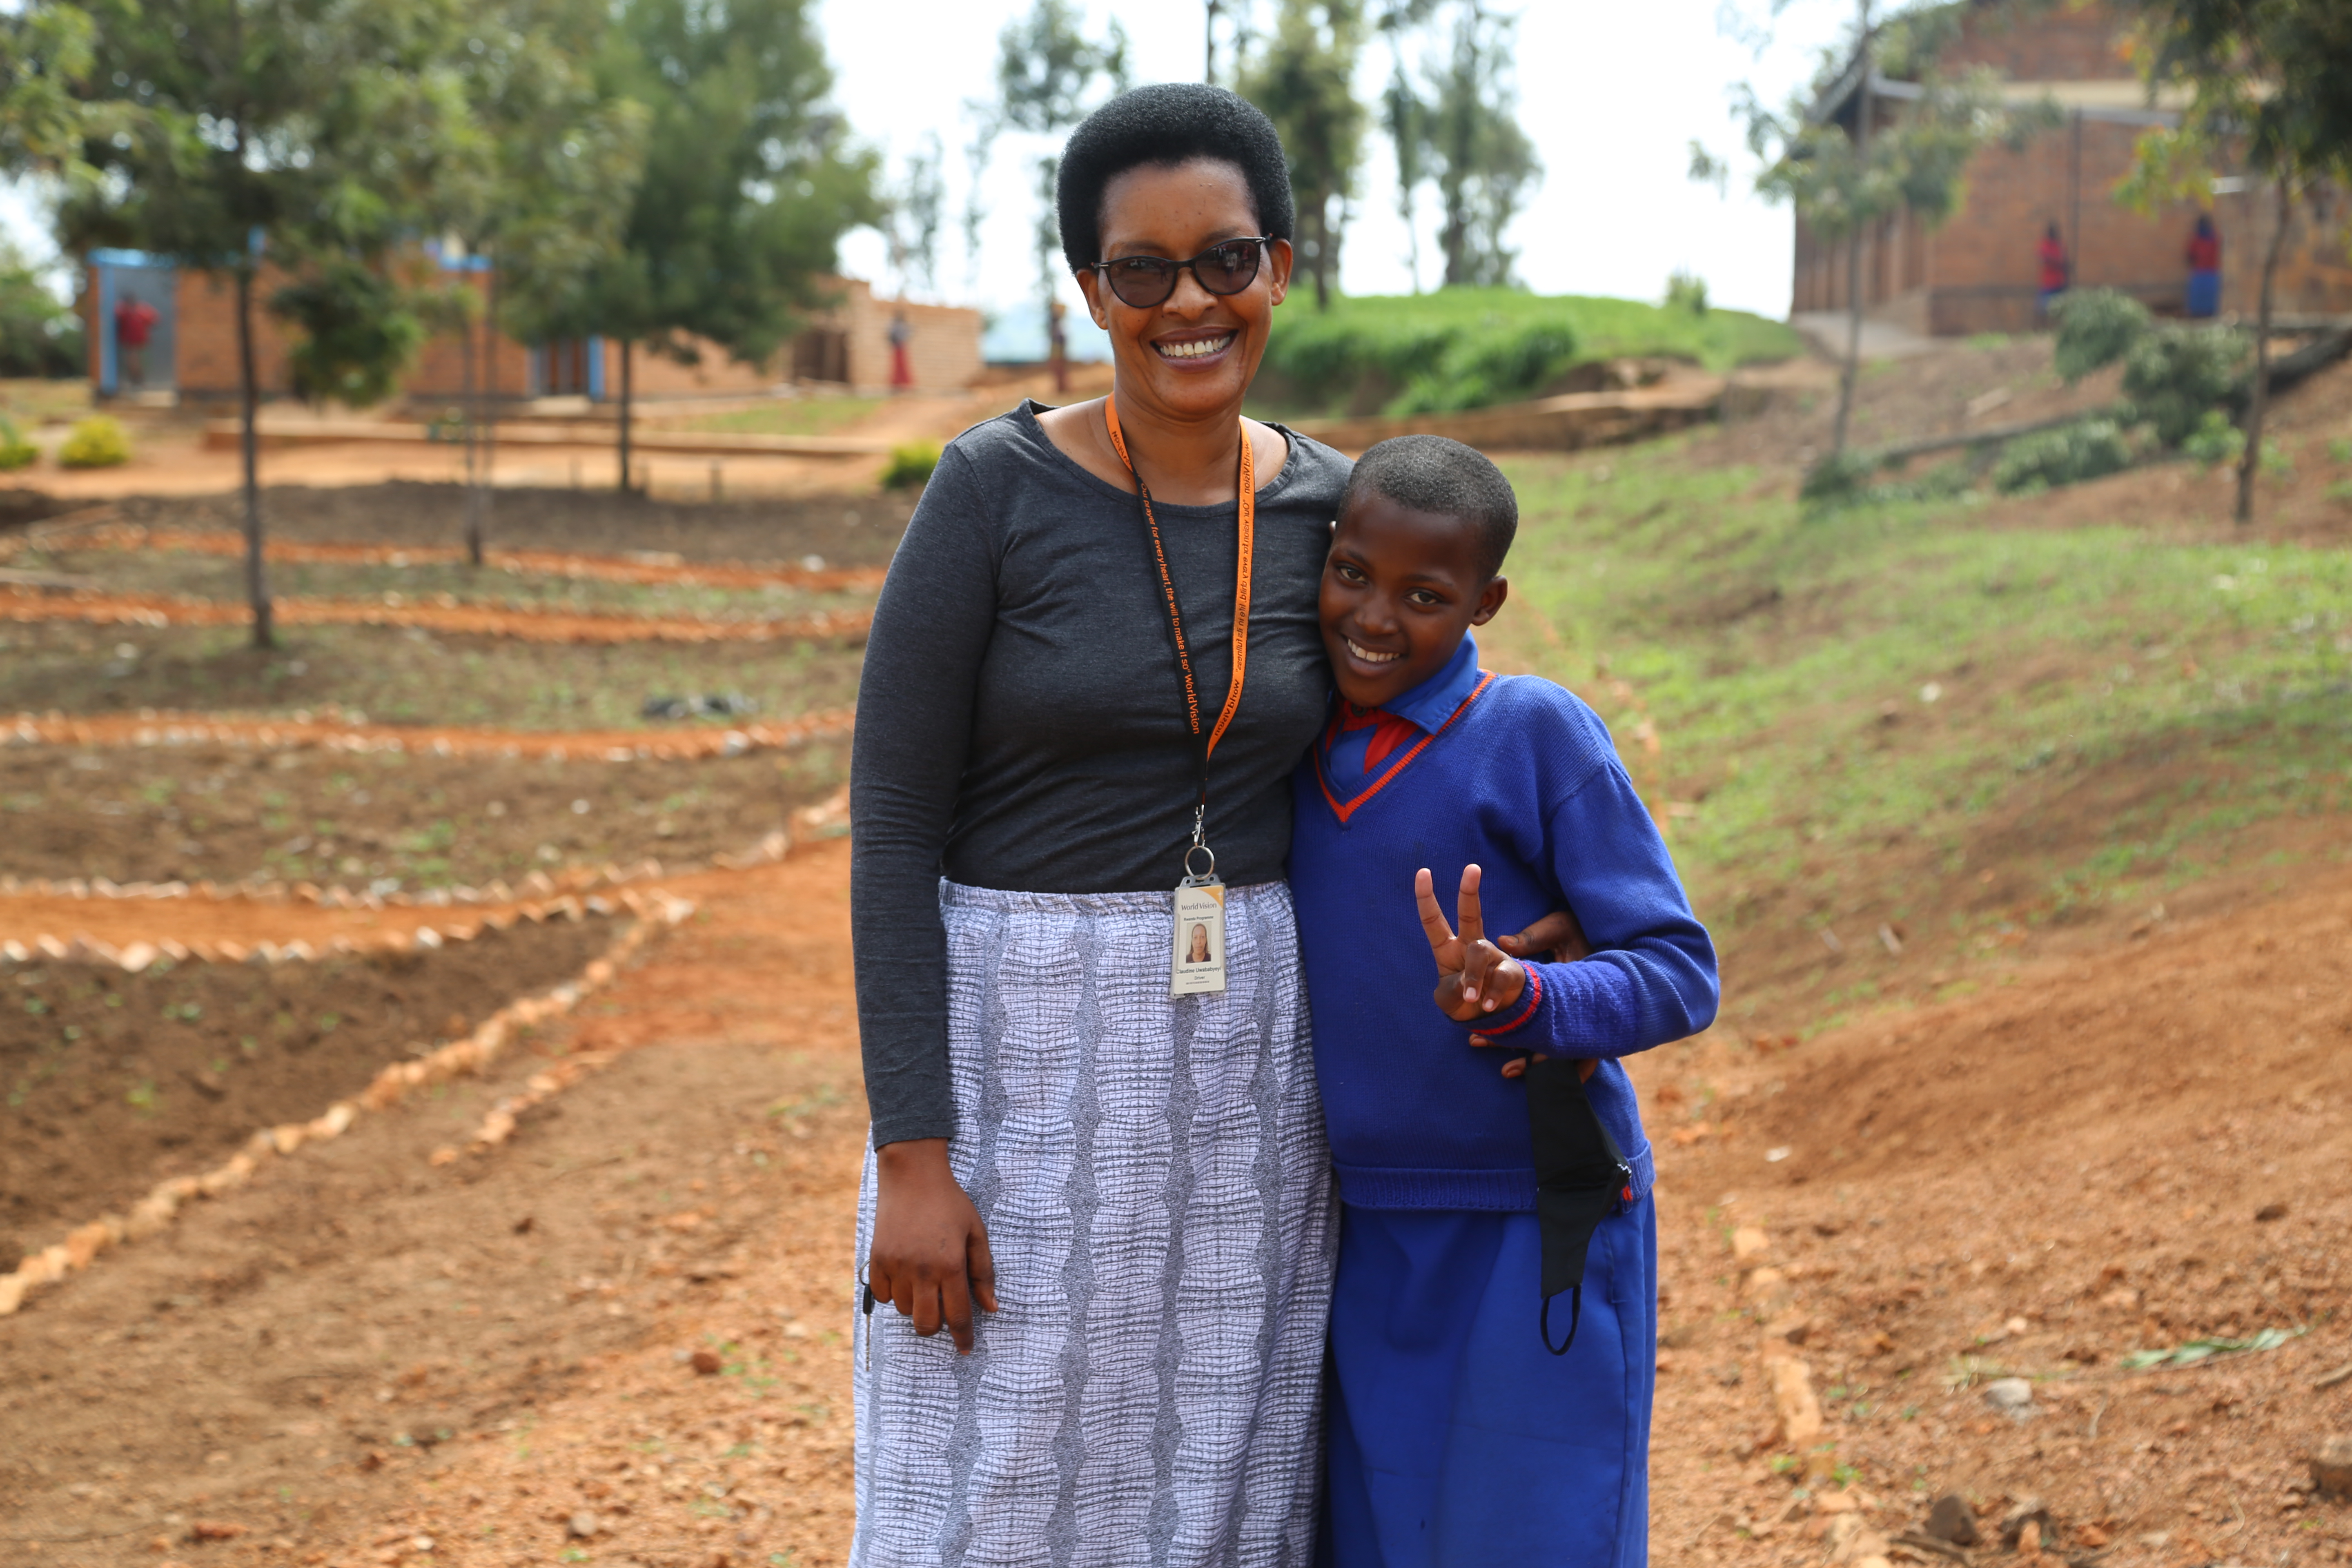 Claudine World Vision's female driver  with Cynthia, a child from Gicumbi district.